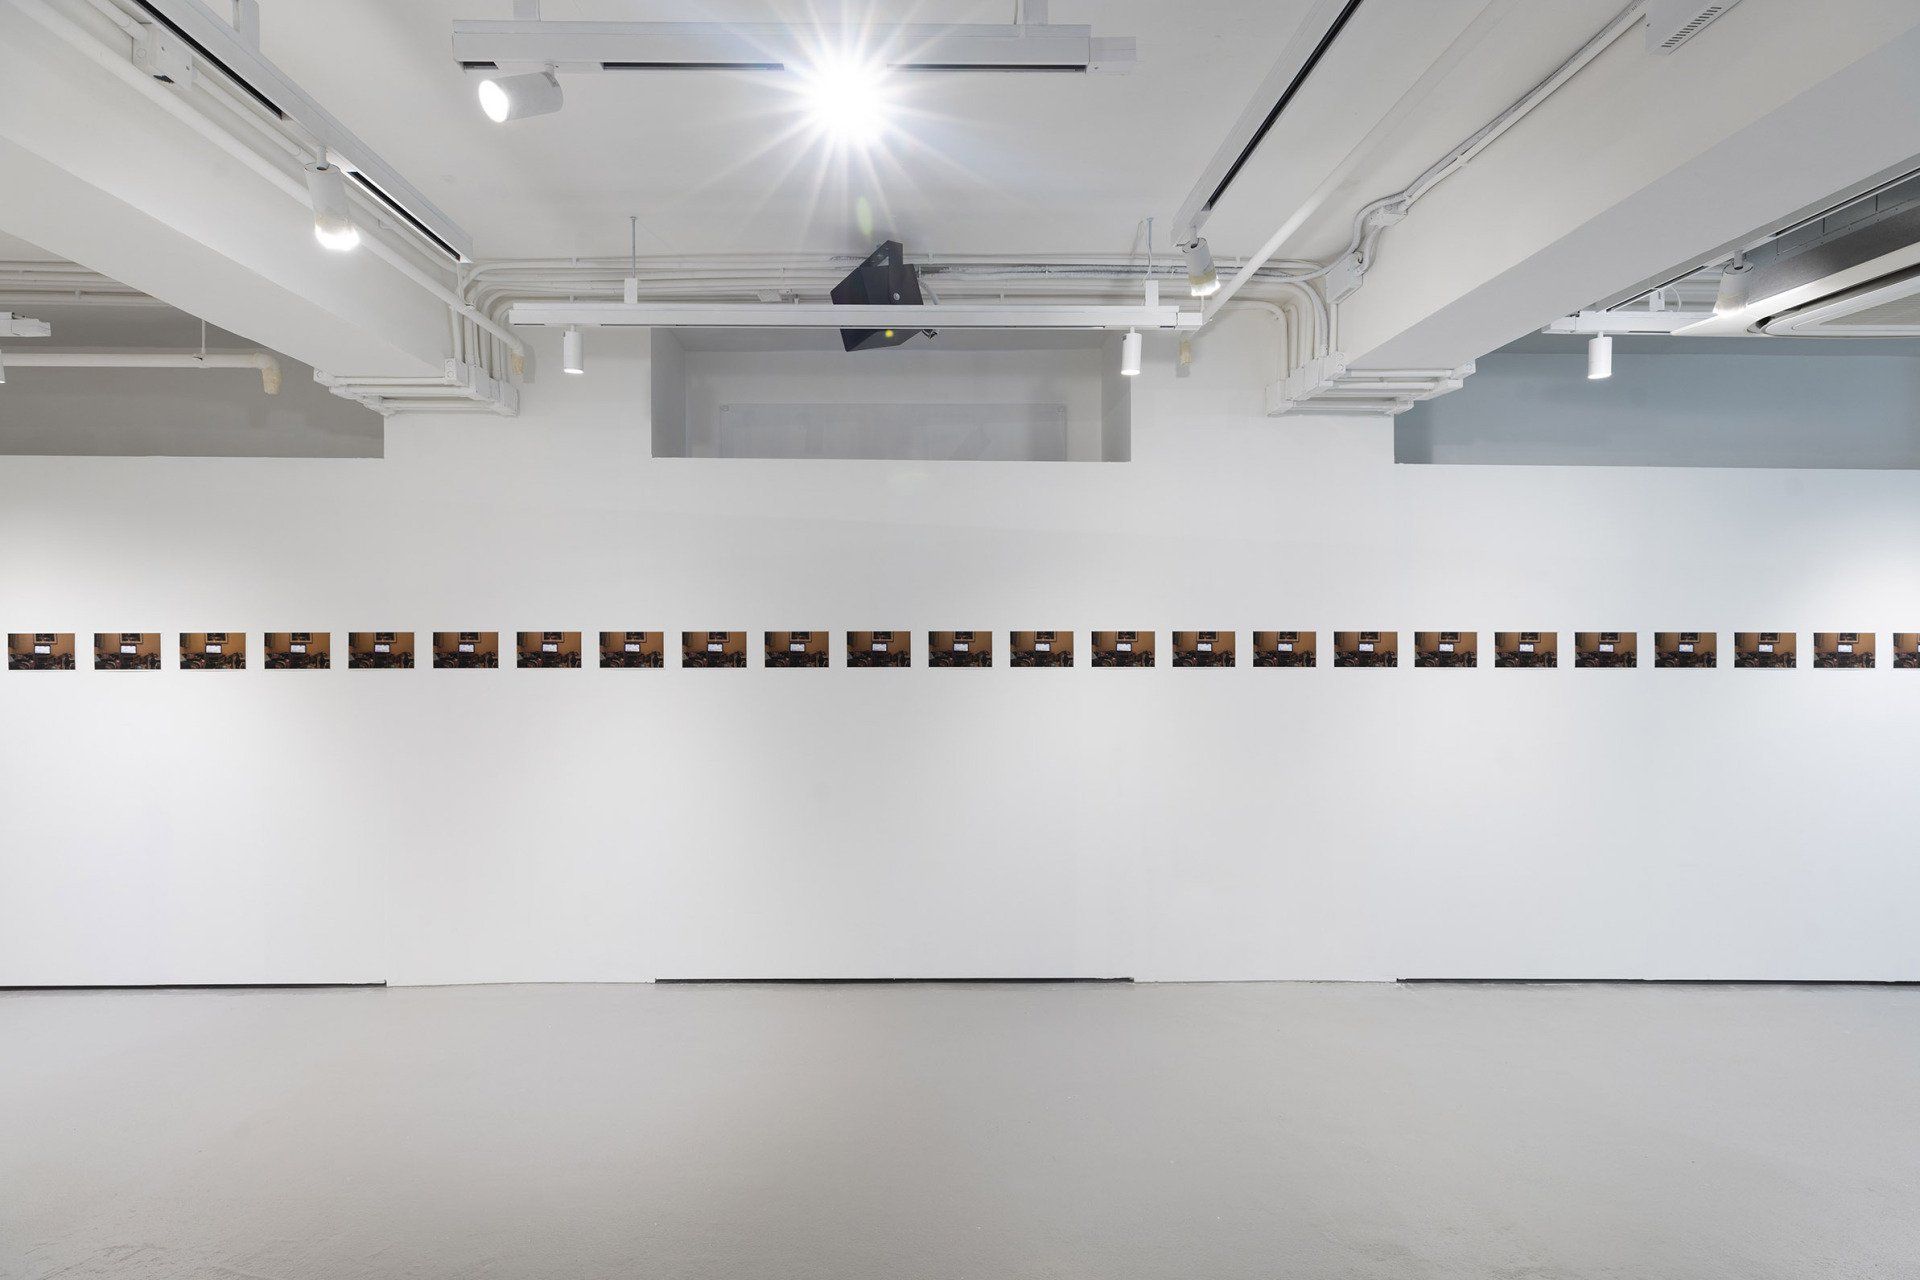 Installation view. Live streaming, Prince Edward, 12/11/2019, 23:35:05-6. 25 frames per second, 1920x1080. 2019. 14.06x25cm. 25 Archival pigment prints. Photograph courtesy WMA Space